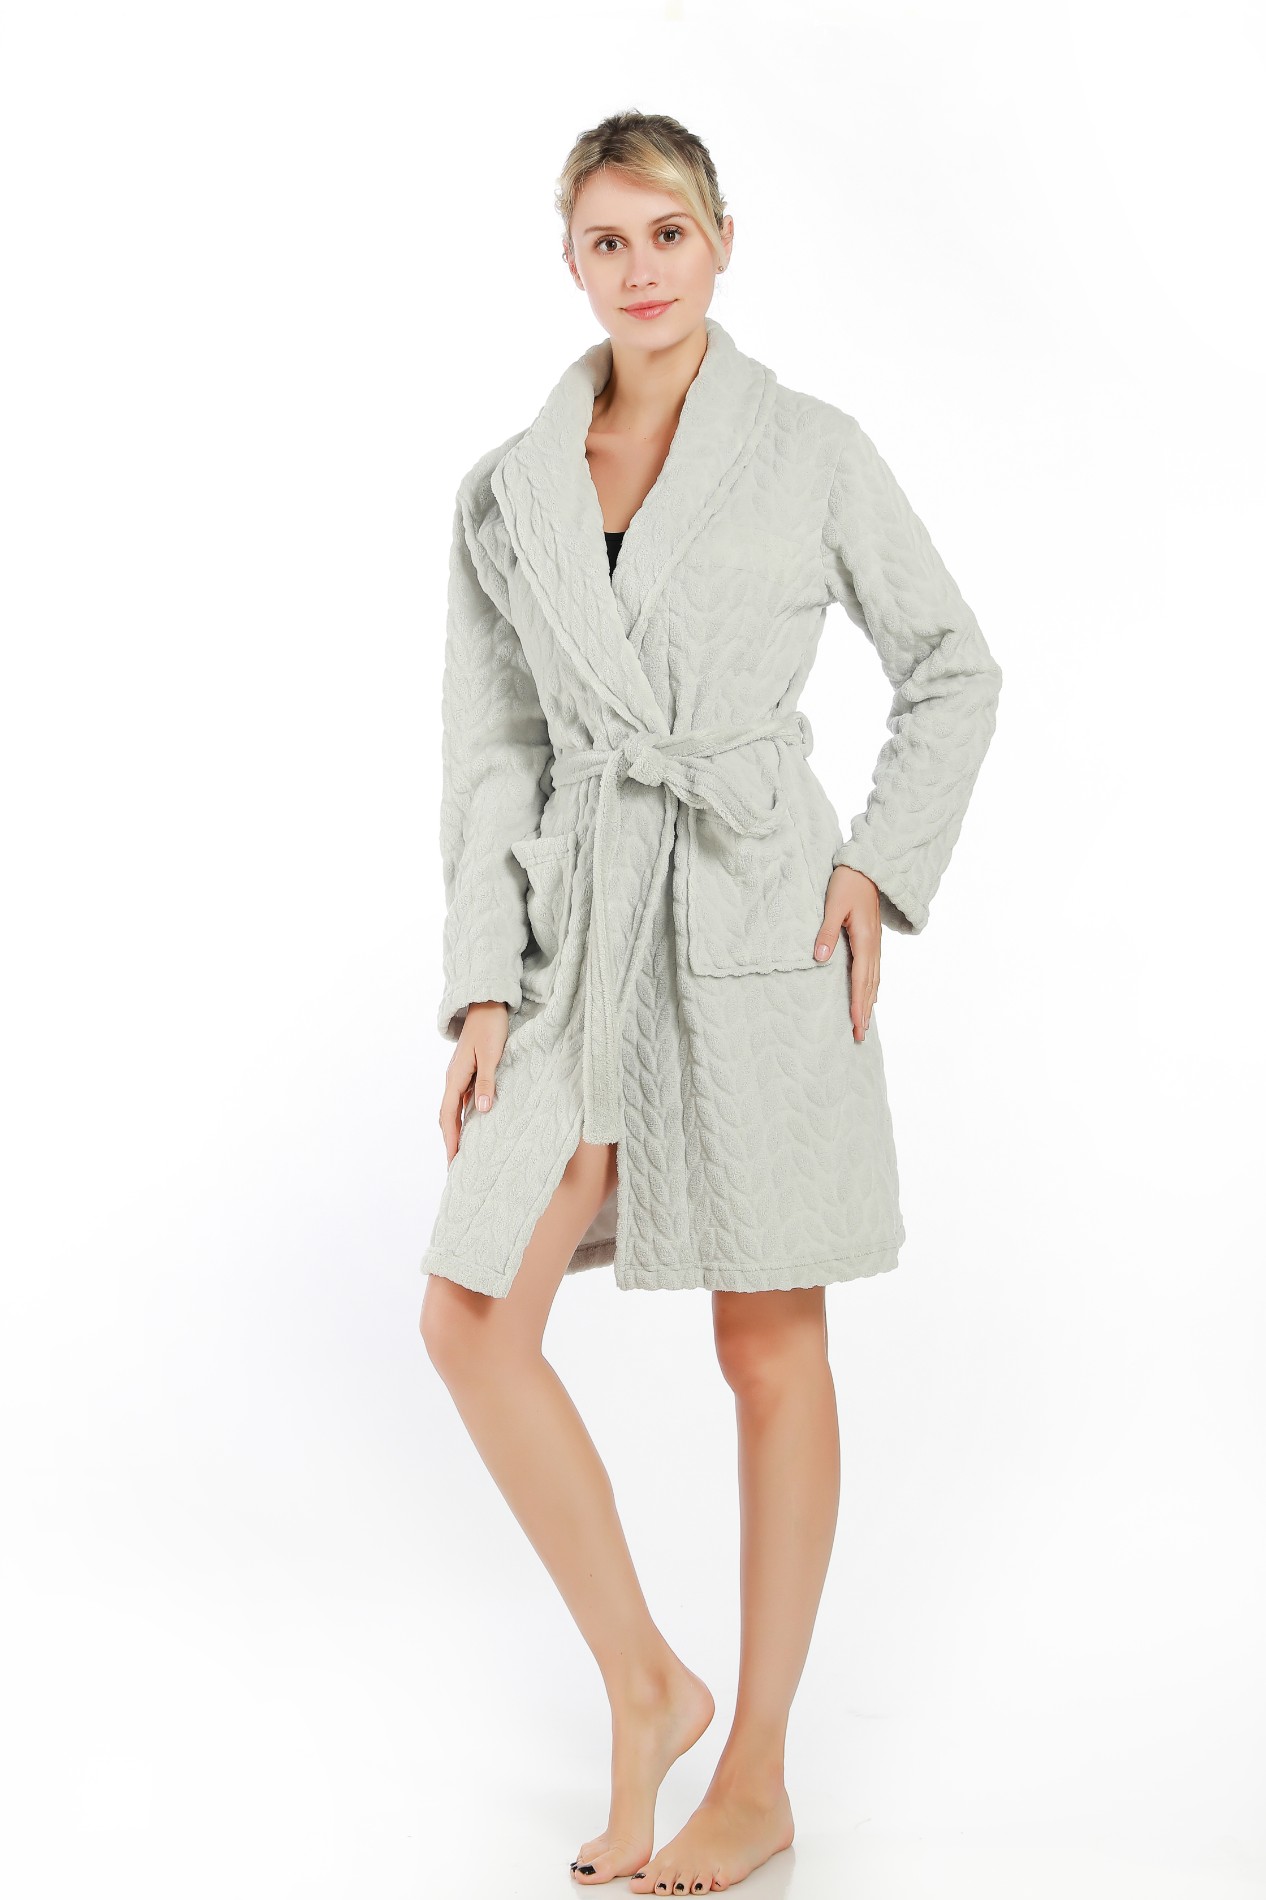 Flannel Ladies Dressing Gown Manufacturers, Flannel Ladies Dressing Gown Factory, Supply Flannel Ladies Dressing Gown